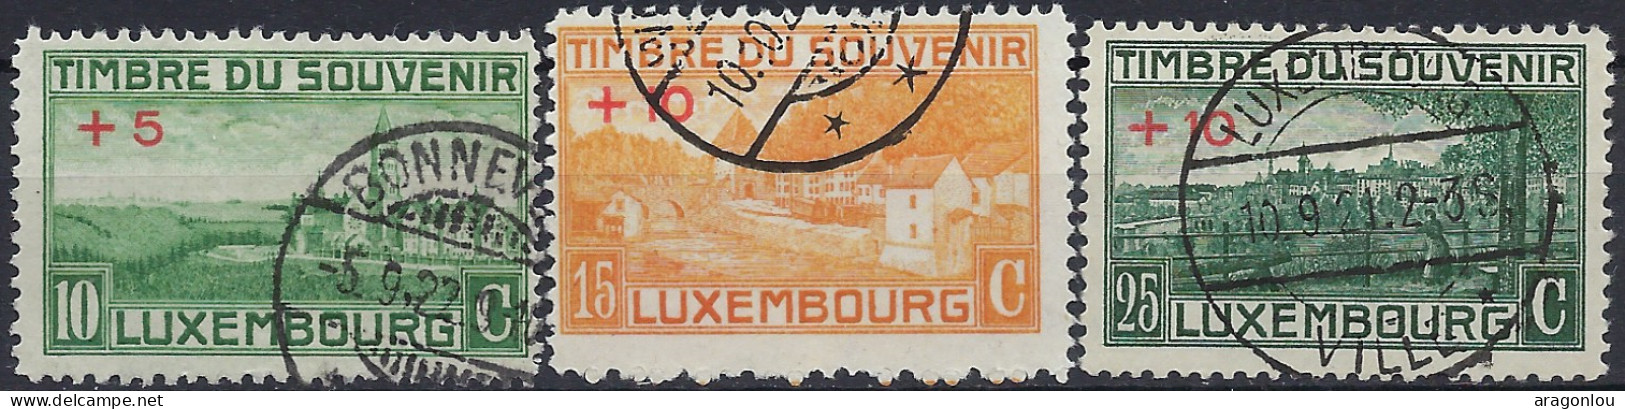 Luxembourg - Luxemburg - Timbres - 1921   1ière  Guerre Mondiale   Série   °   VC. 20,- - Used Stamps